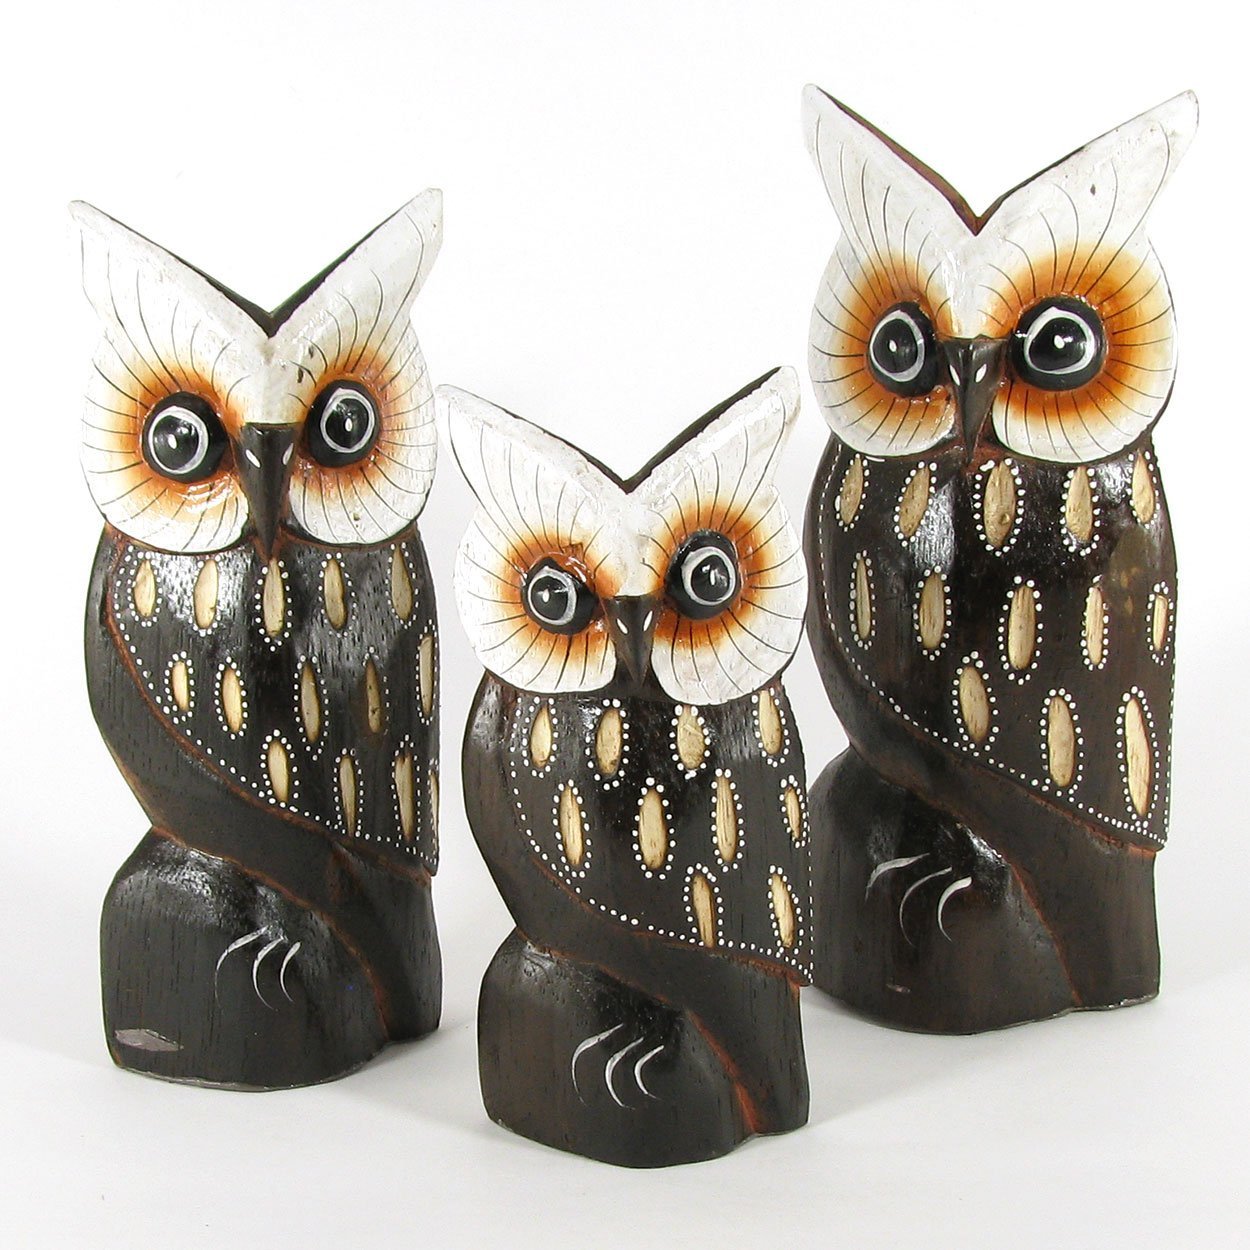 140038 - Set of Three 4-8in Wooden Owls - Pointy White